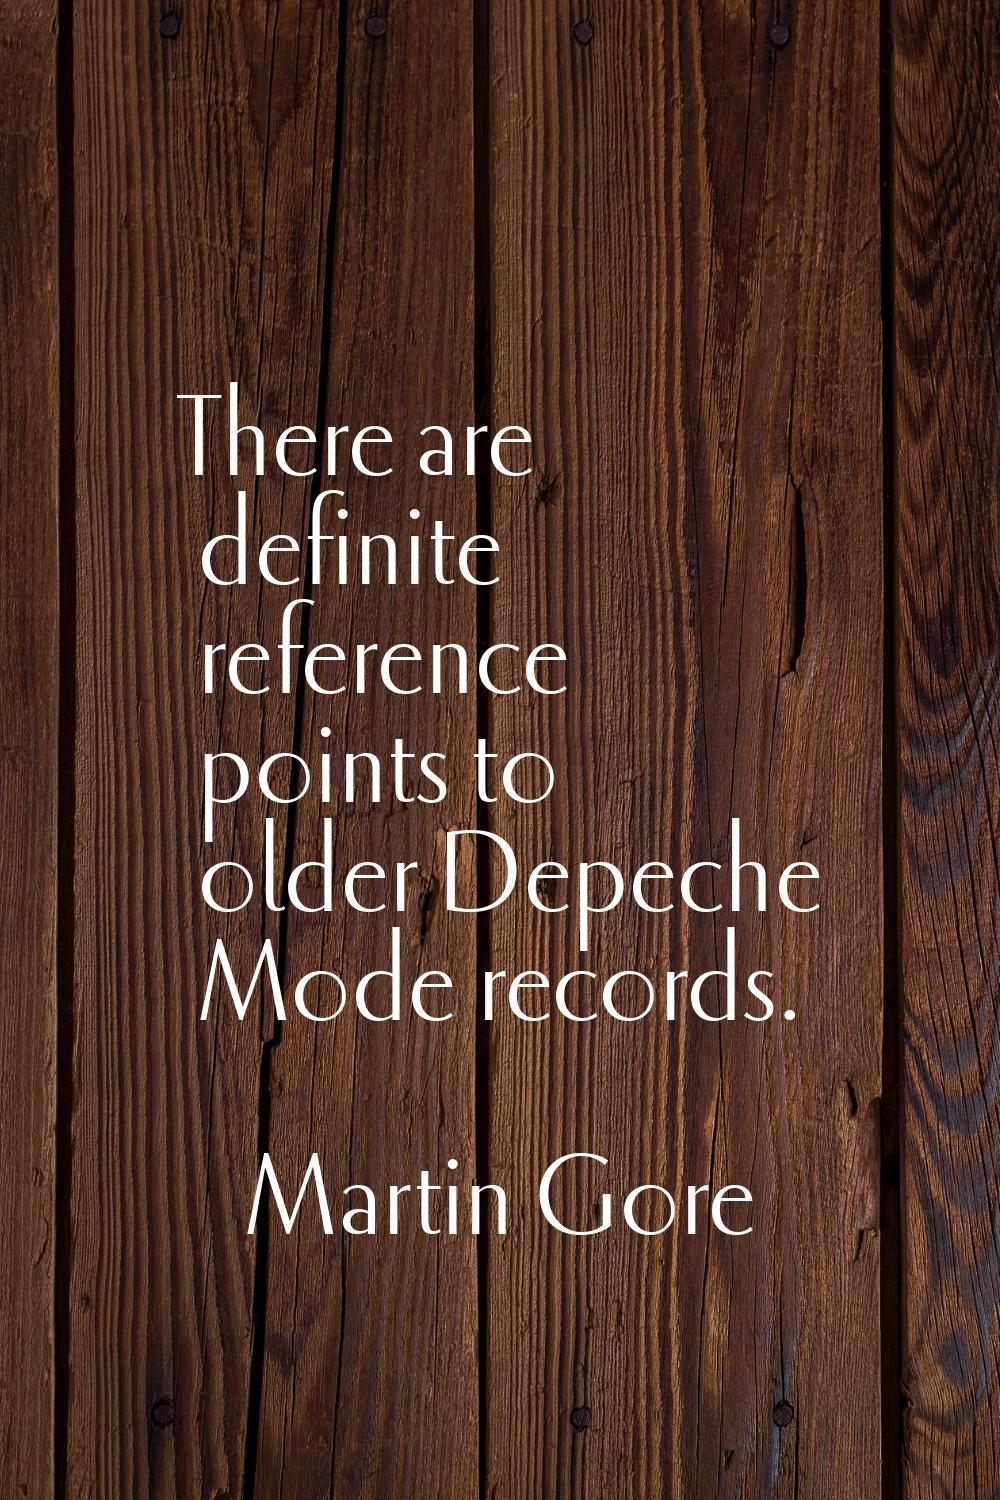 There are definite reference points to older Depeche Mode records.